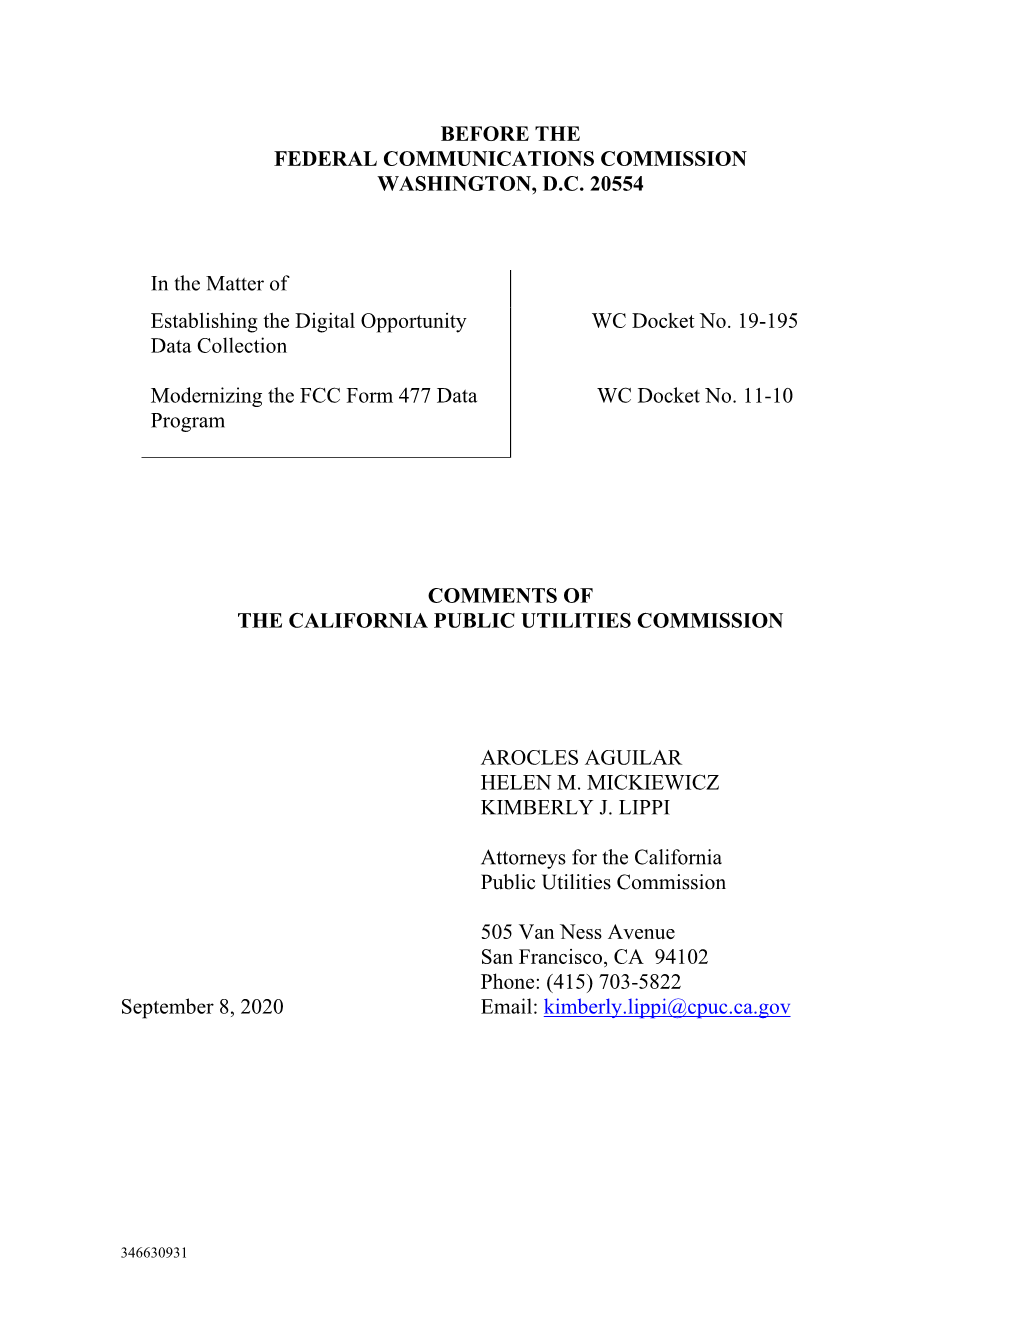 Comments of the California Public Utilities Commission